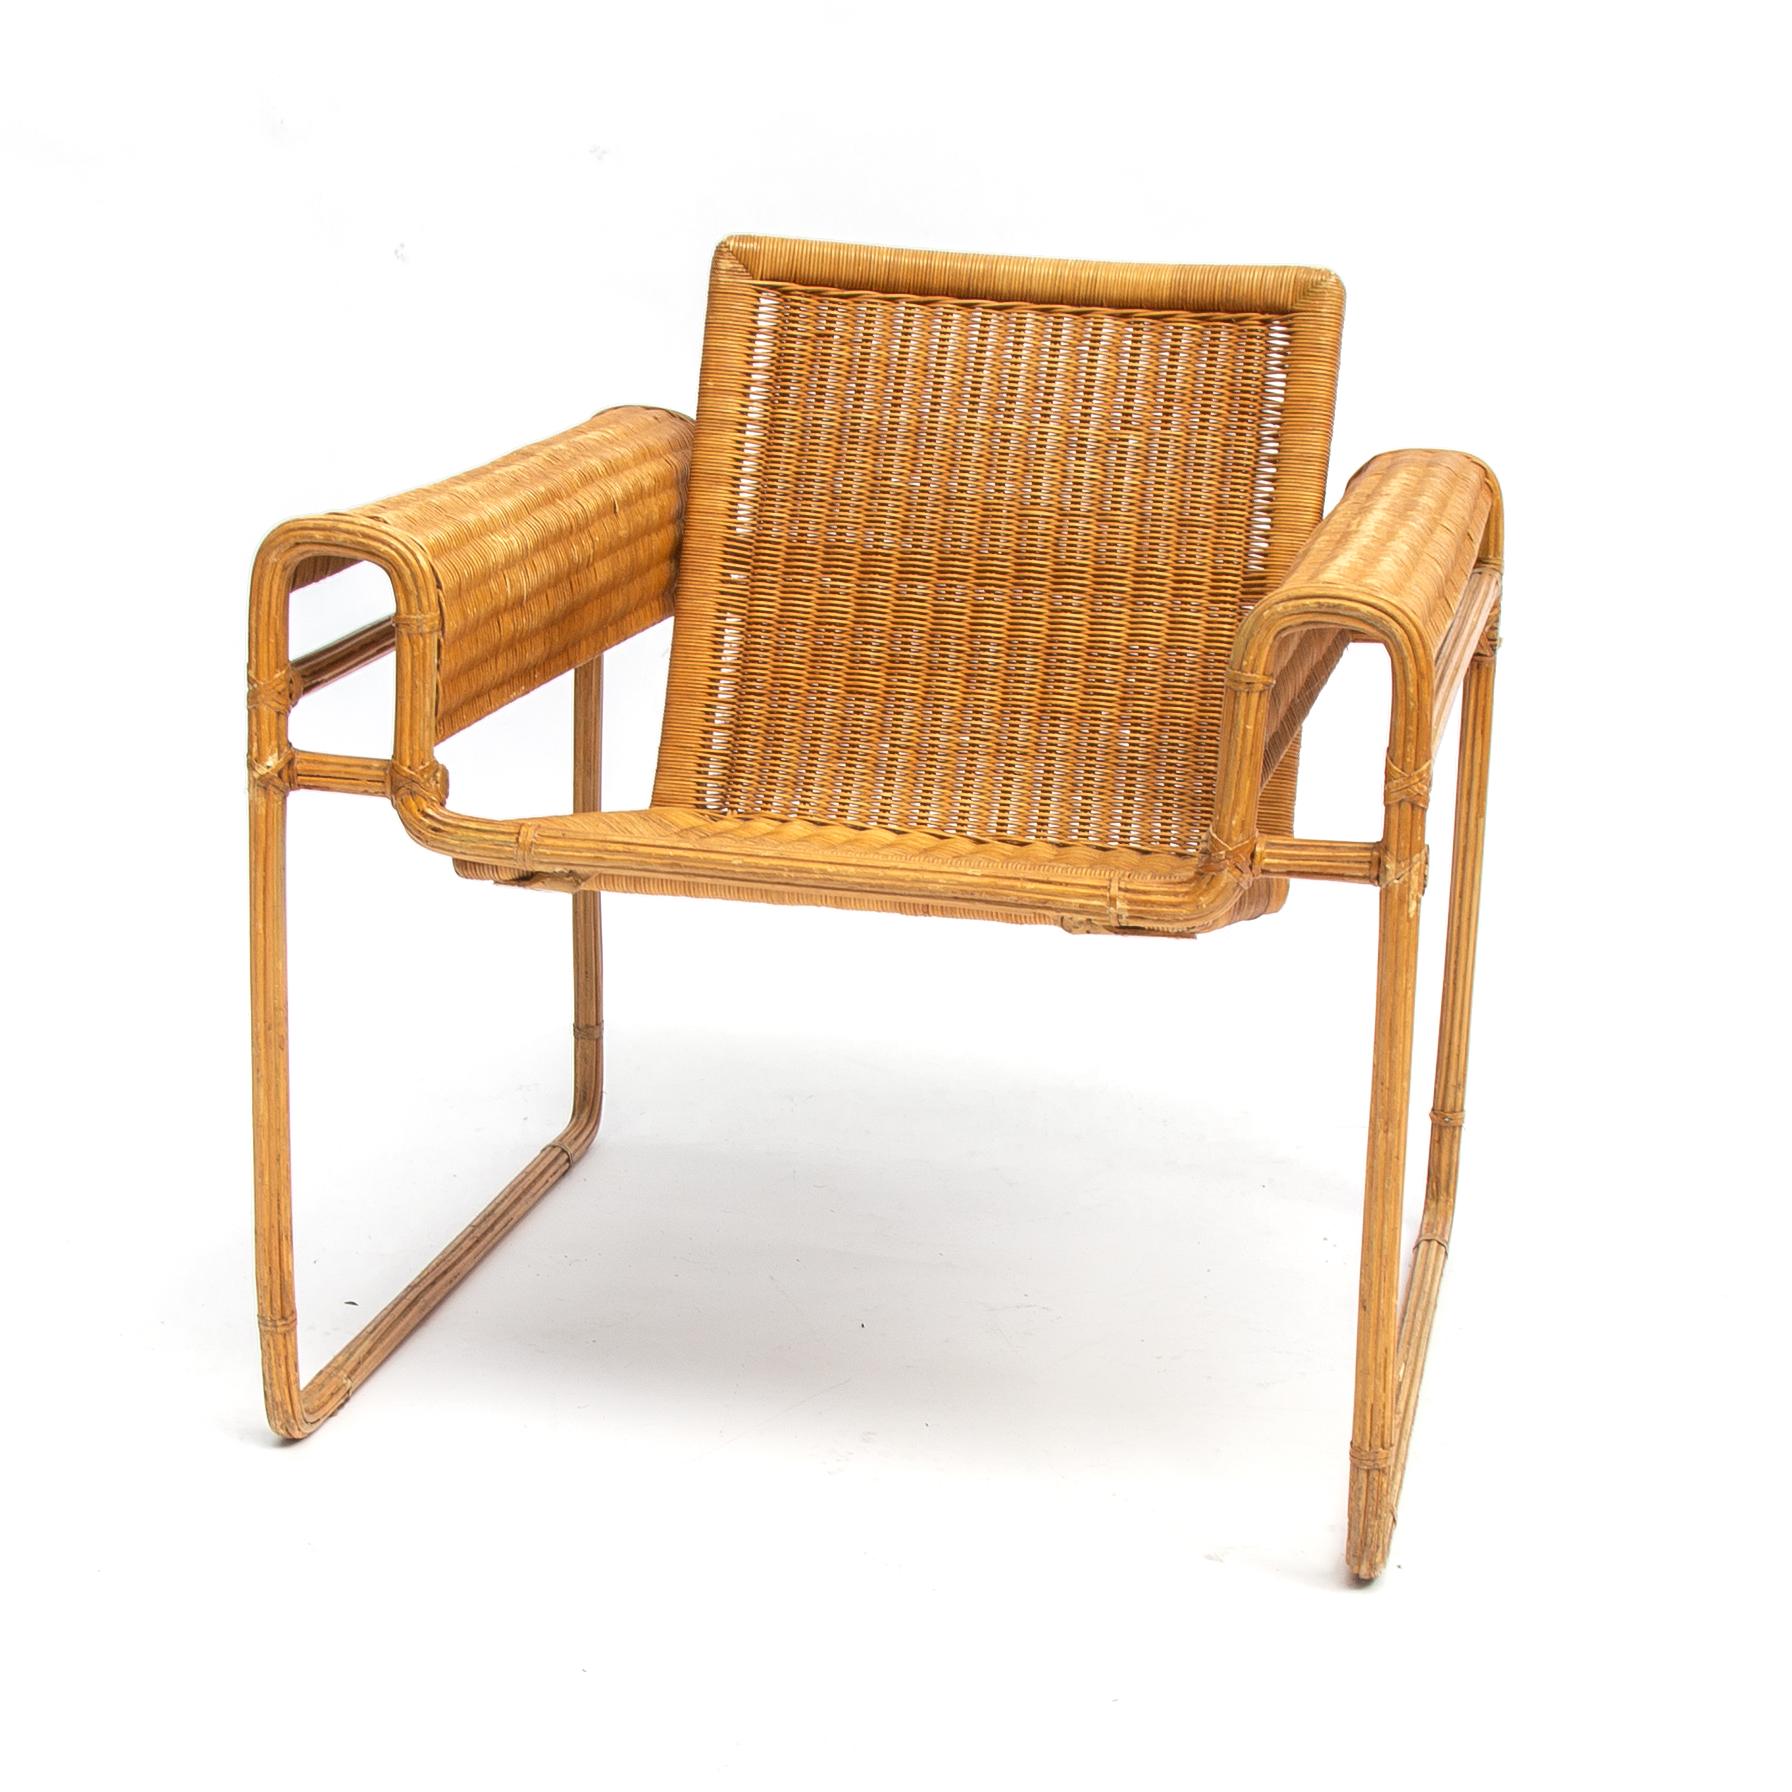 Rare and absolute unique translation of the original Wassily chair by Marcel Breuer. The metal frame owns covered with strips if lacquered bamboo, seating and beck are handmade wicker.

The Wassily chair, inspired by the frame of a bicycle and